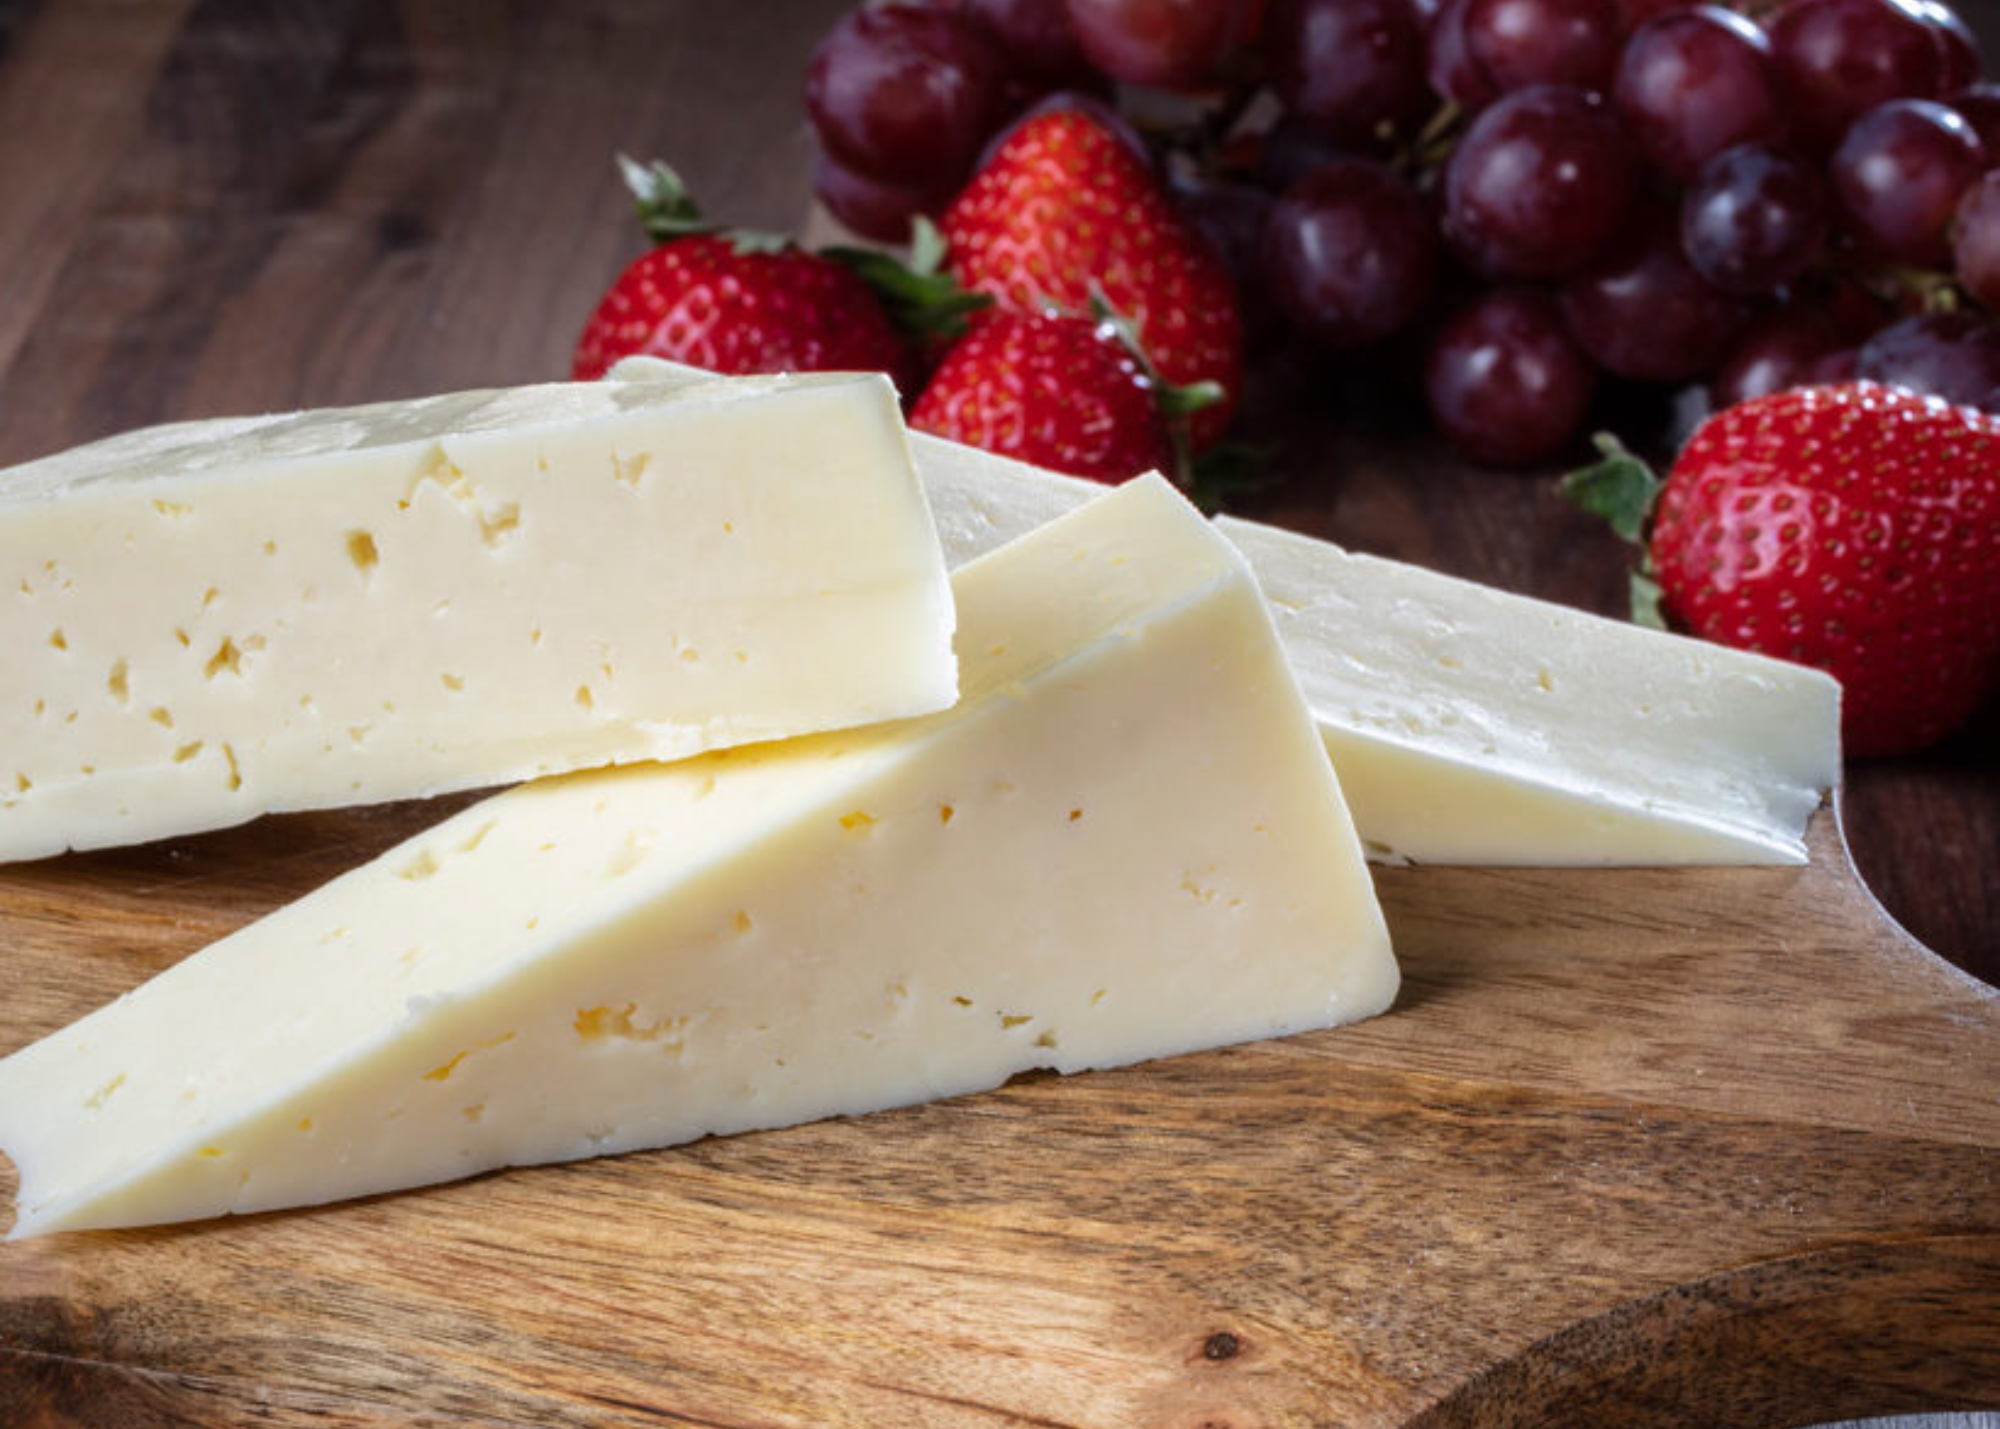 Three thick slices of havarti cheese are placed on a wooden board, with strawberries and grapes behind it